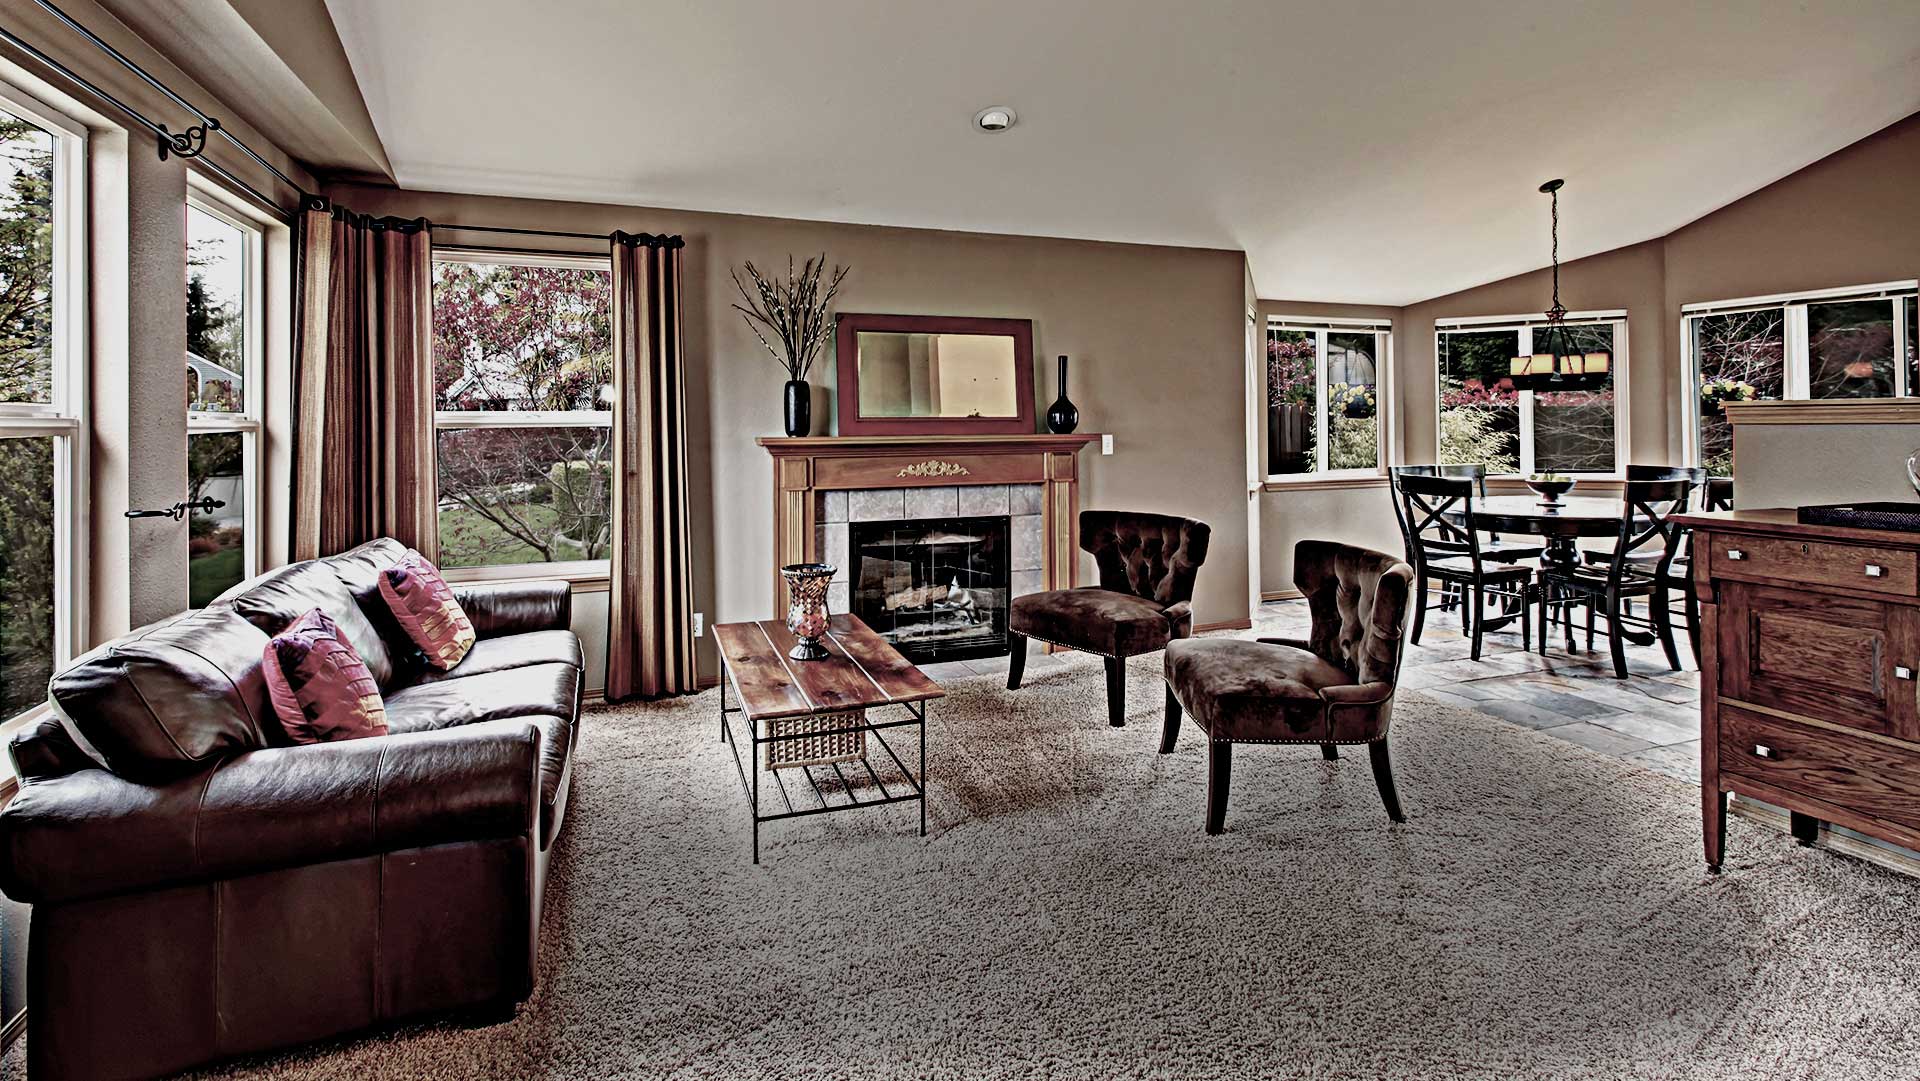 Carpet Cleaning Services, Air Duct Cleaning and Furniture Cleaning Services